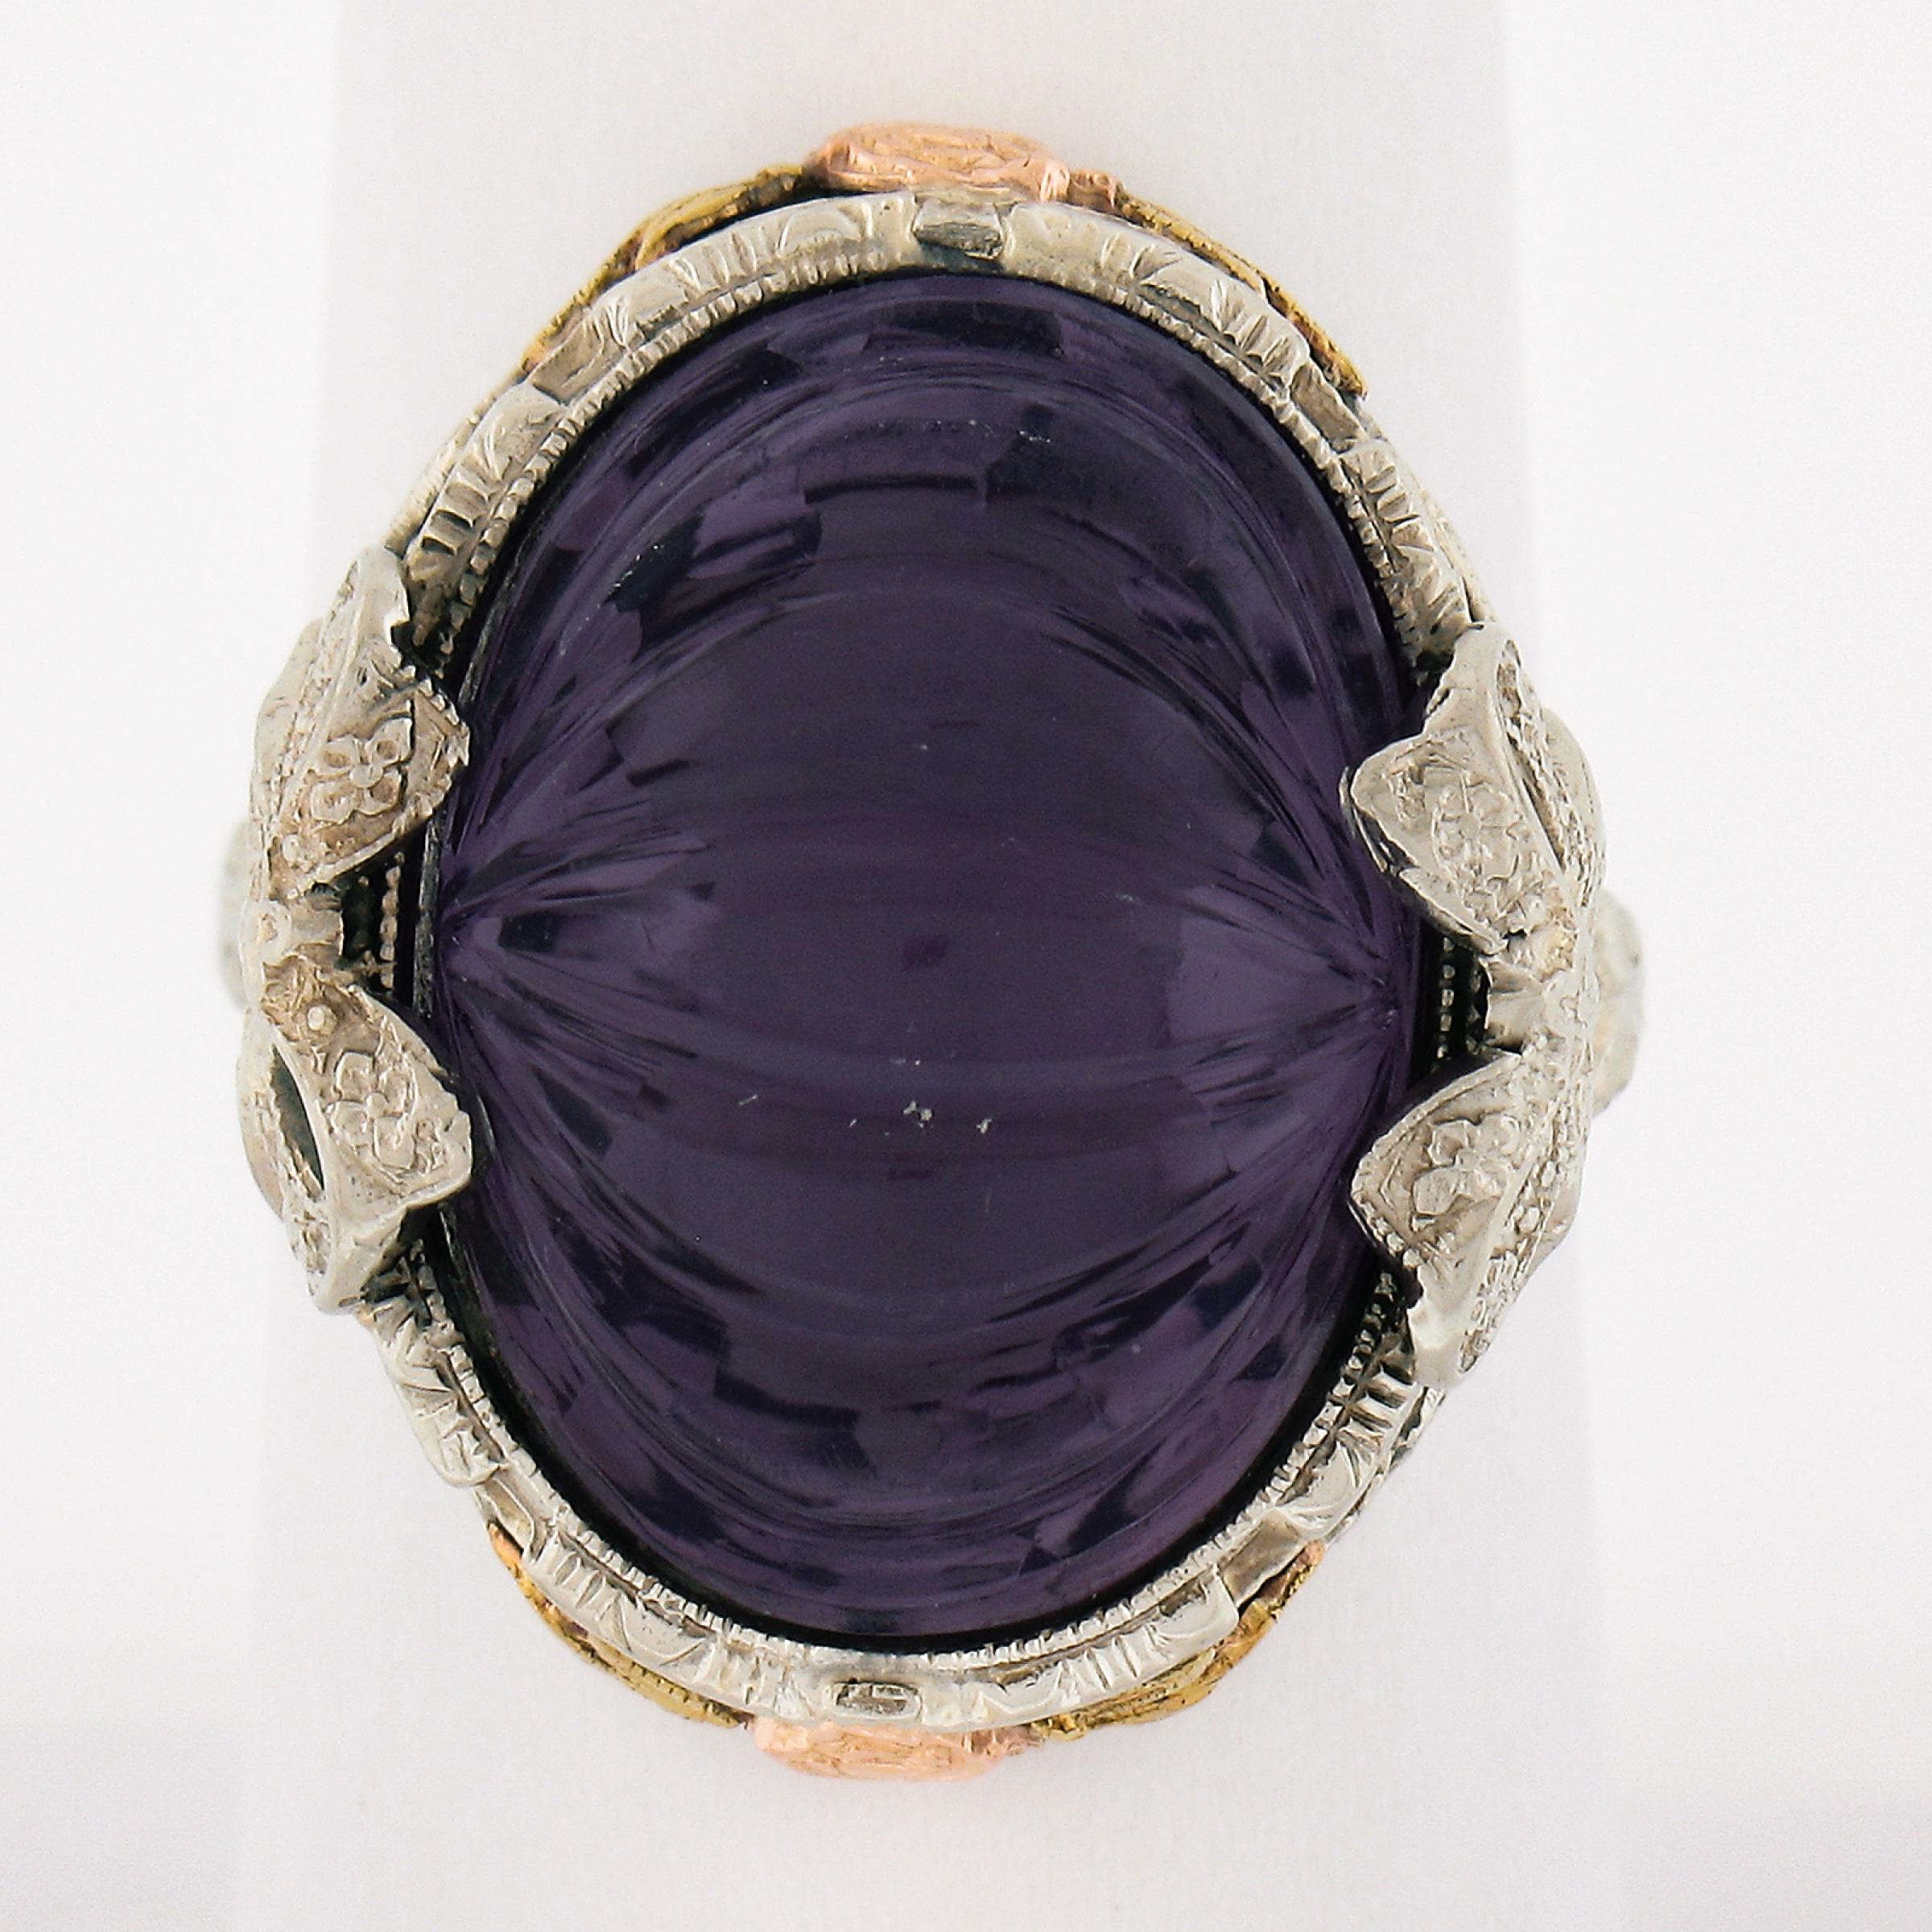 --Stone(s):--
(1) Natural Genuine Amethyst - Carved Oval Cut - Prong Set - Transparent Medium Purple Color - 18x12.8mm (approx.)

Material: Solid 14k White & Green Gold w/ Rose Gold Accents 
Weight: 7.02 Grams
Ring Size: 8.0 (Fitted on a finger. We